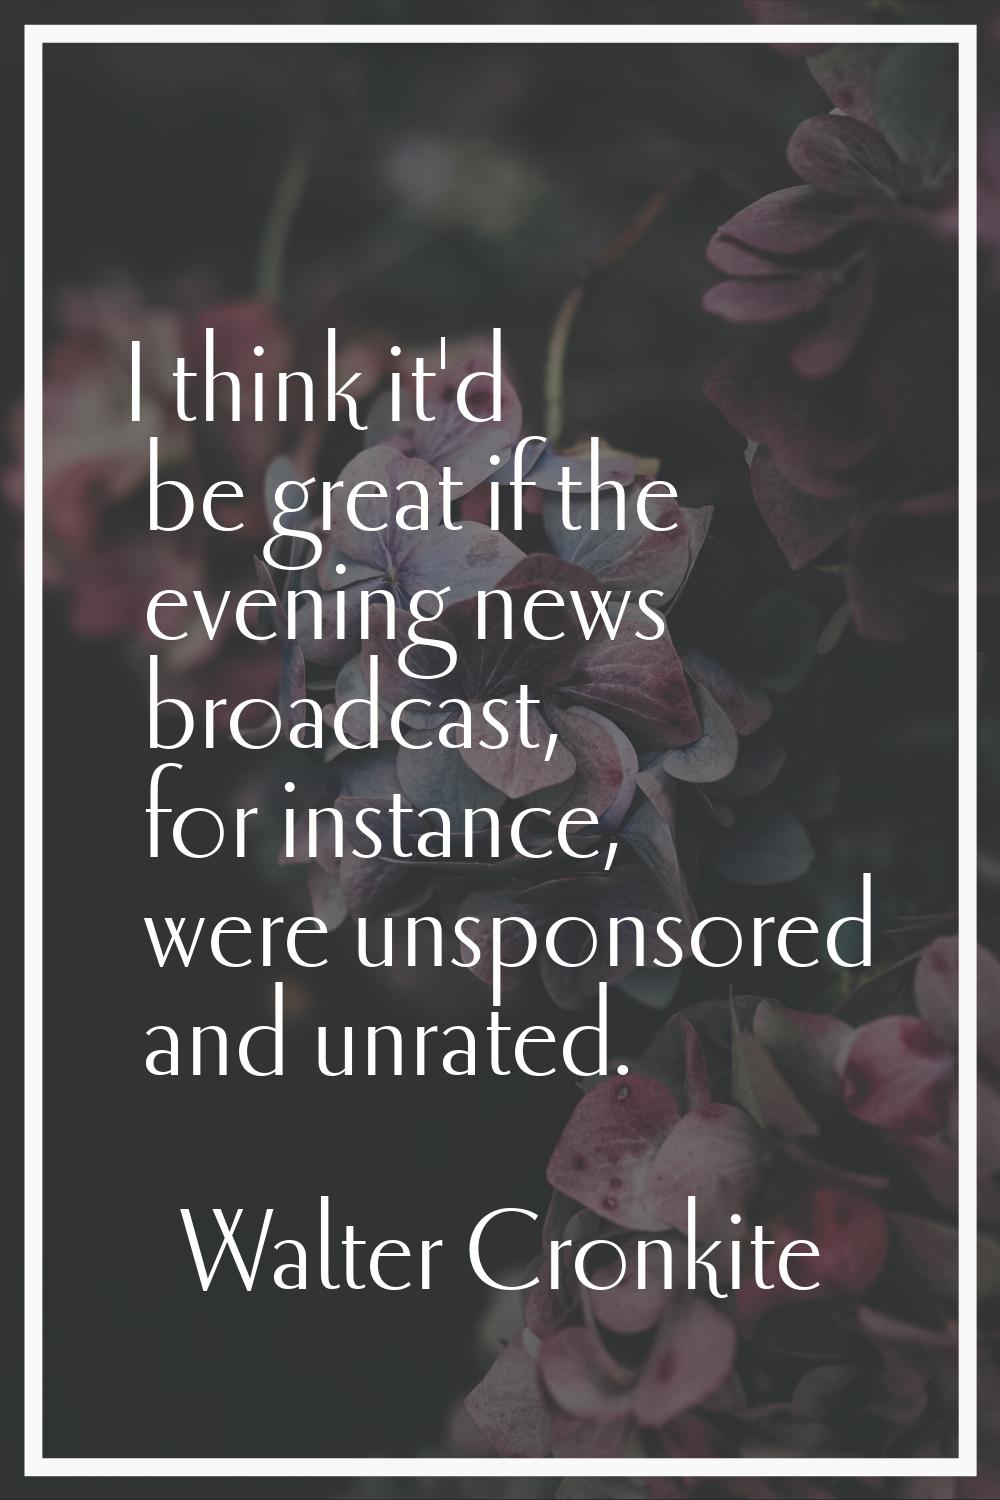 I think it'd be great if the evening news broadcast, for instance, were unsponsored and unrated.